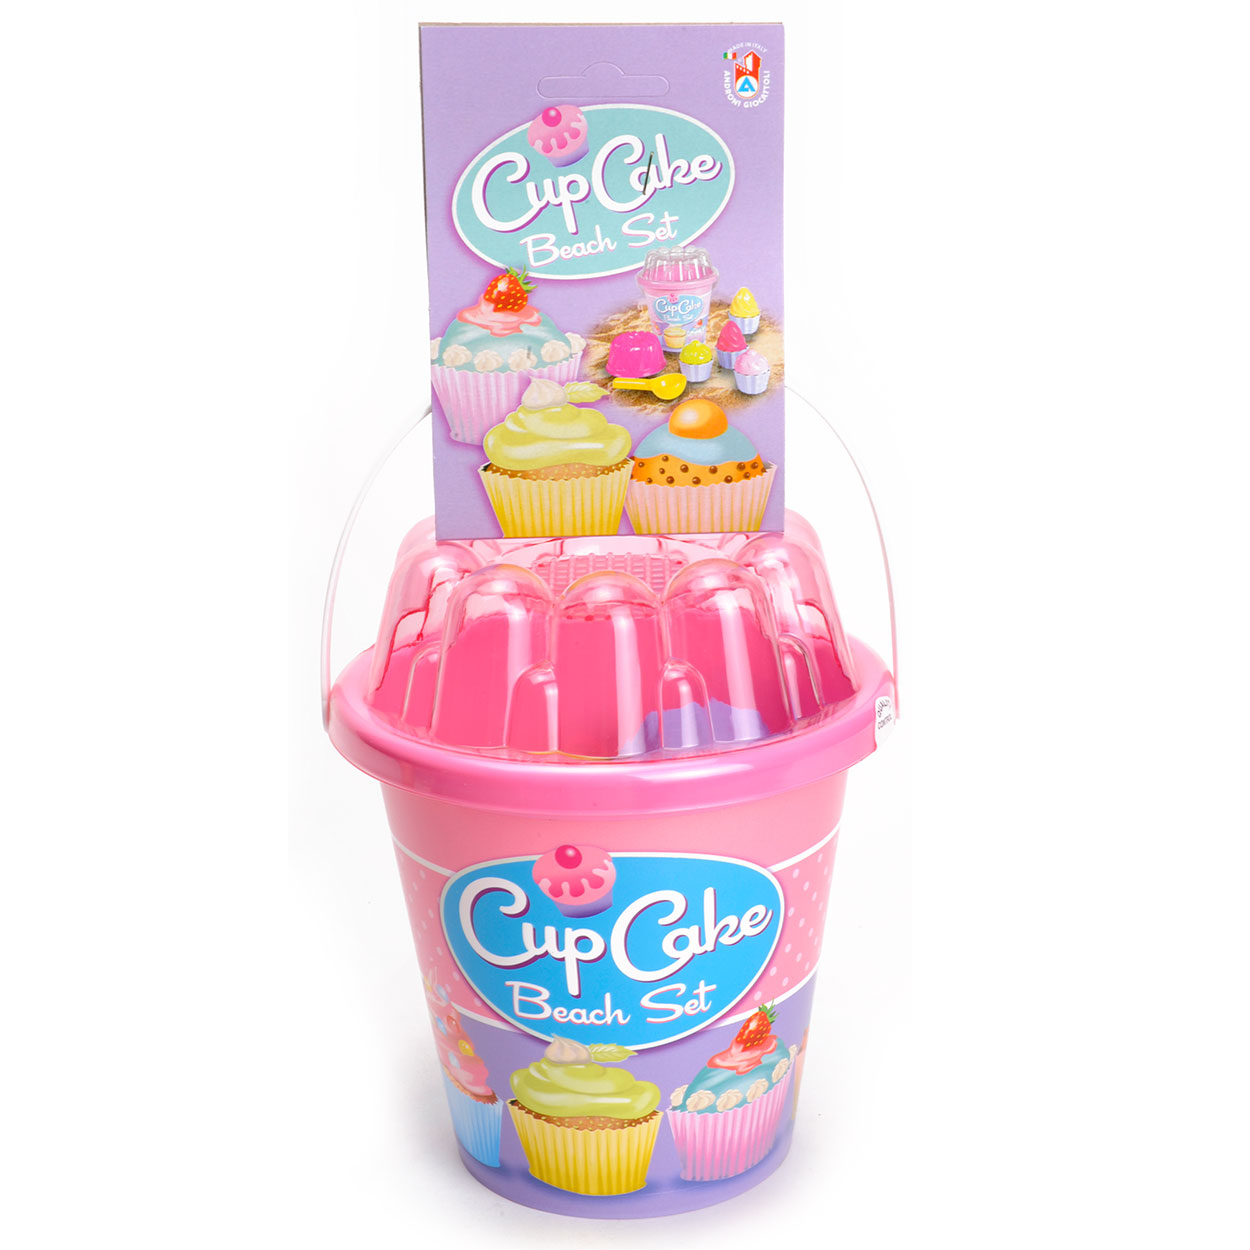 Cup Cake Strandset in Emmer Thimble